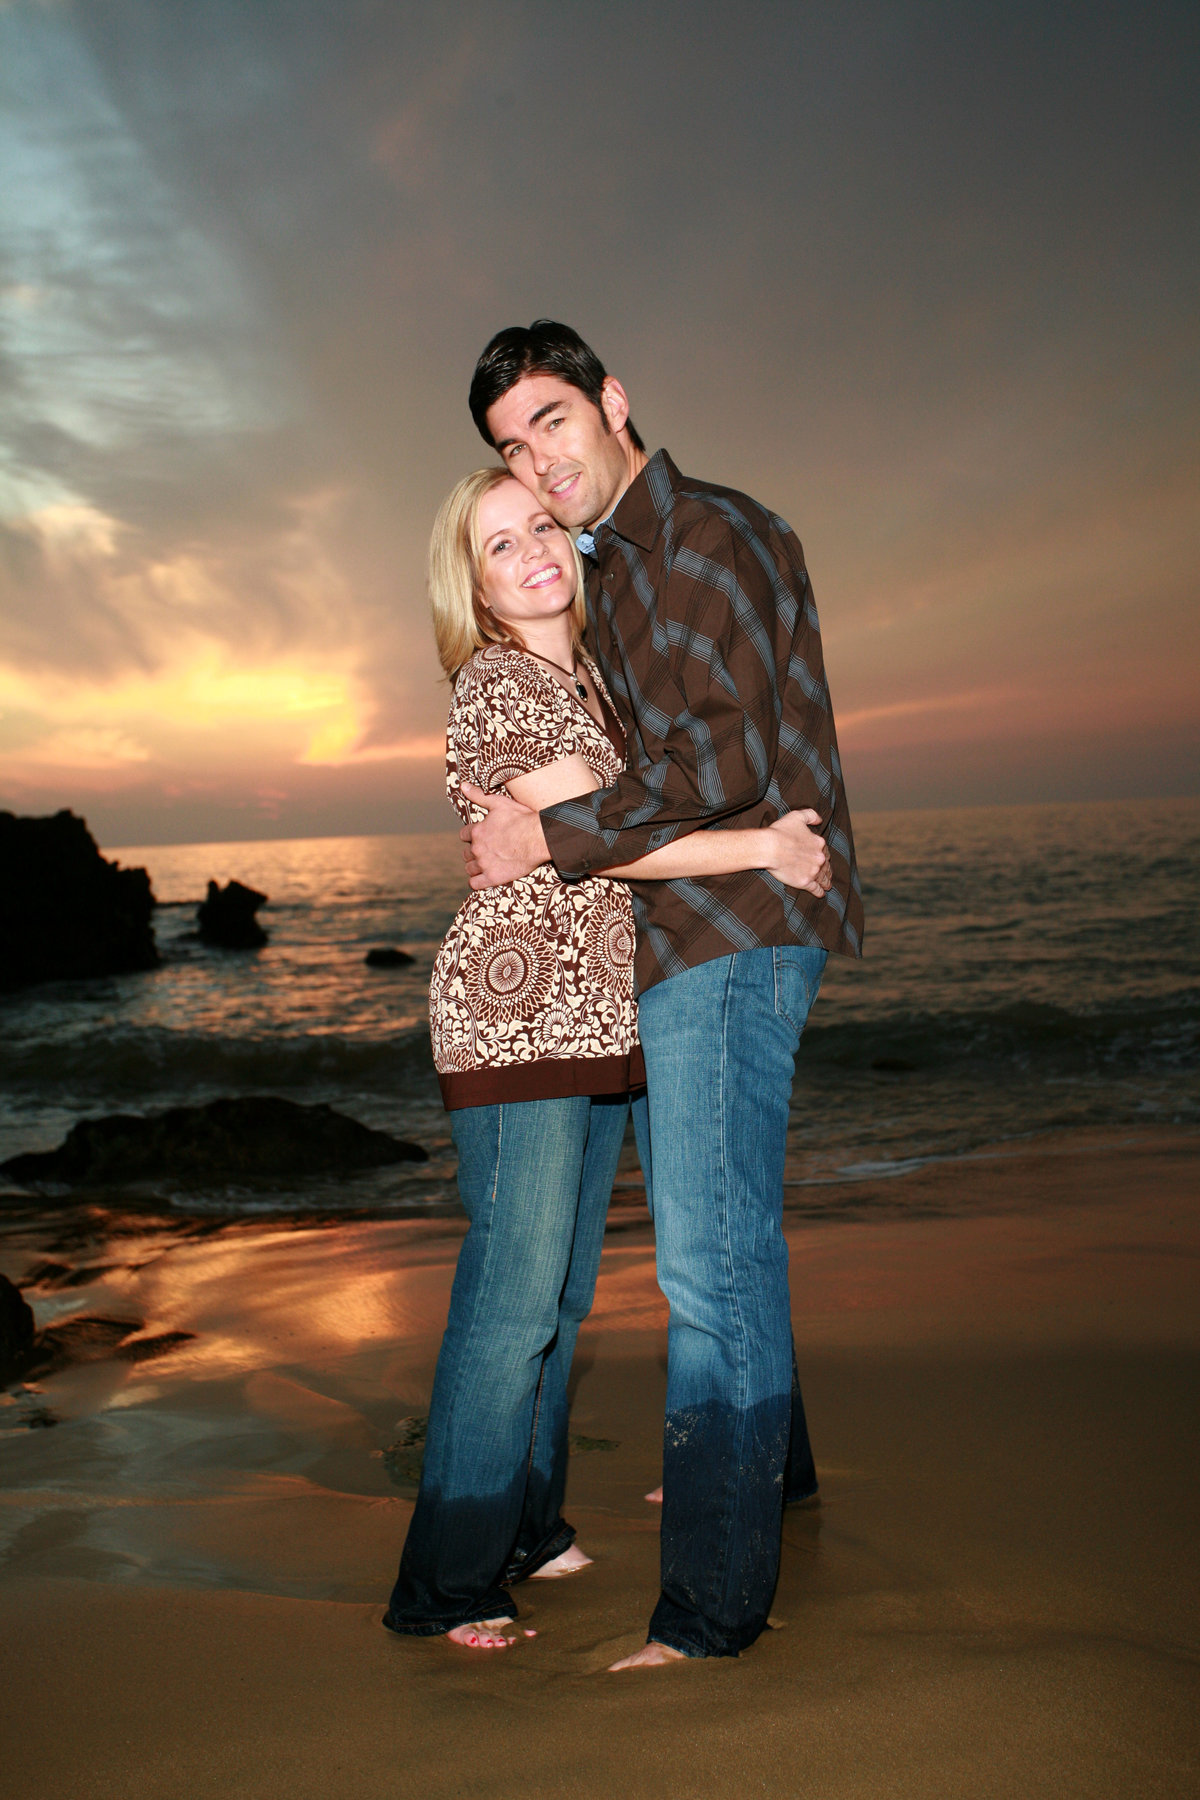 Kassel will capture your engagement shoot in studio or location. Lets go to the beach!